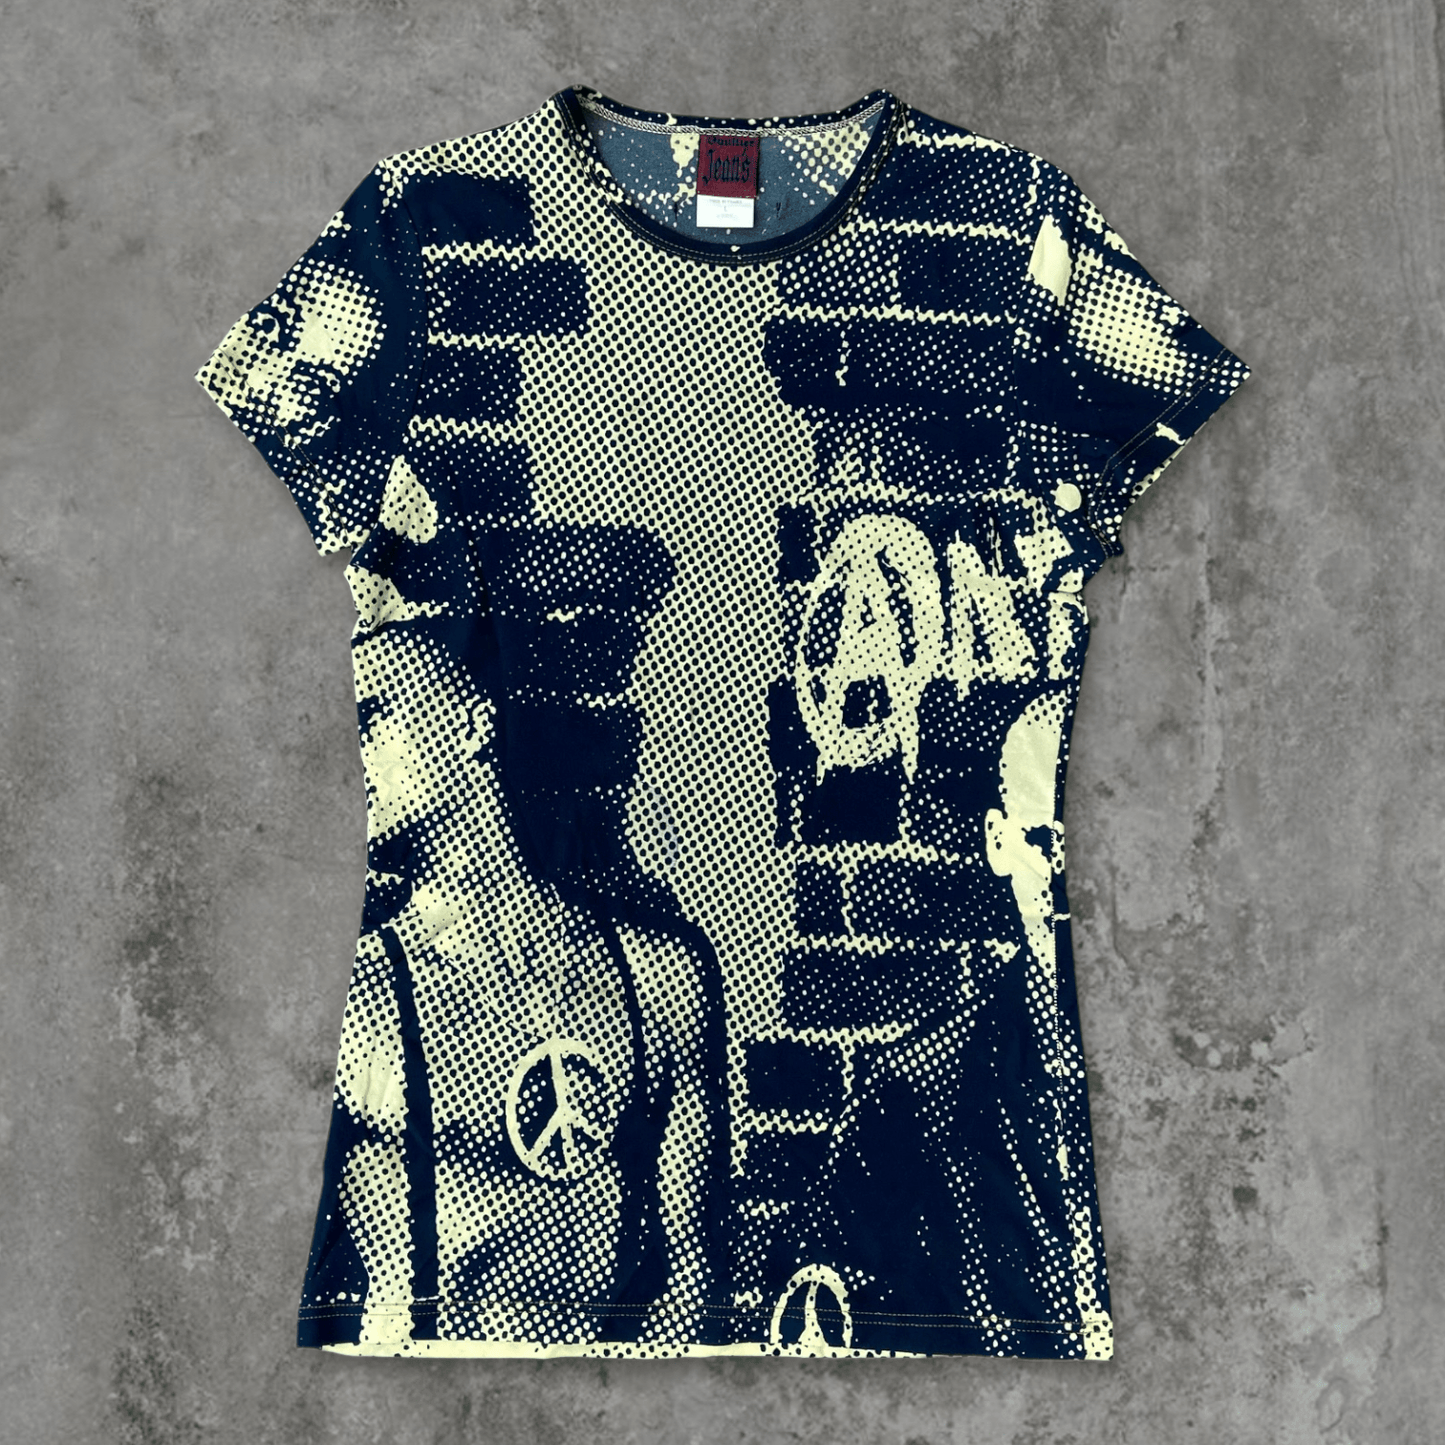 JEAN PAUL GAULTIER 'FIGHT RACISM' AW1997 GRAPHIC TOP - L - Known Source